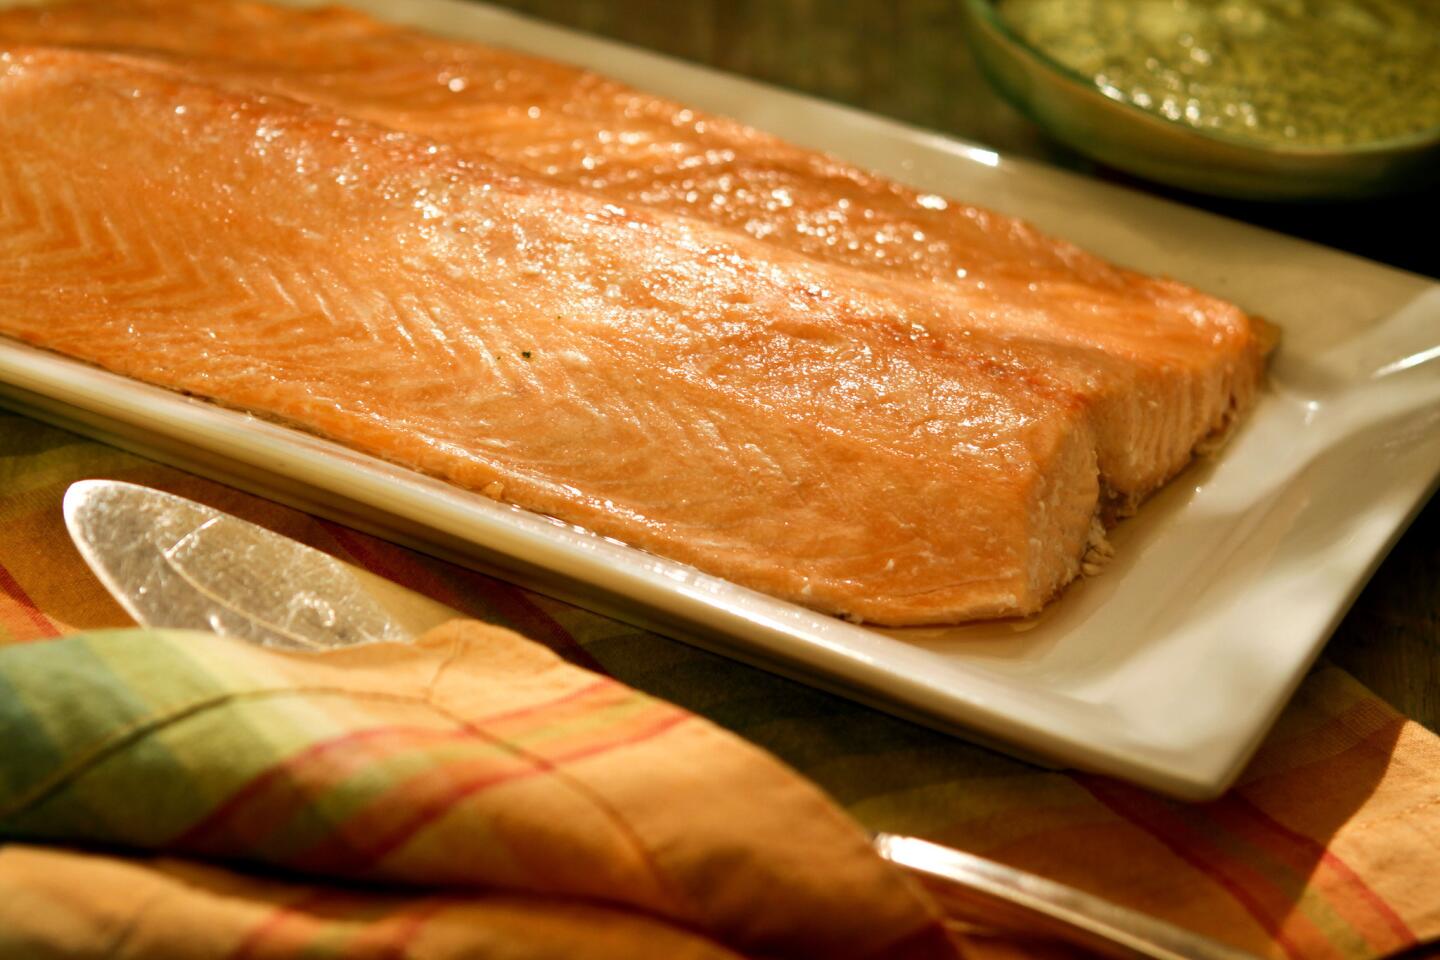 Steamed salmon